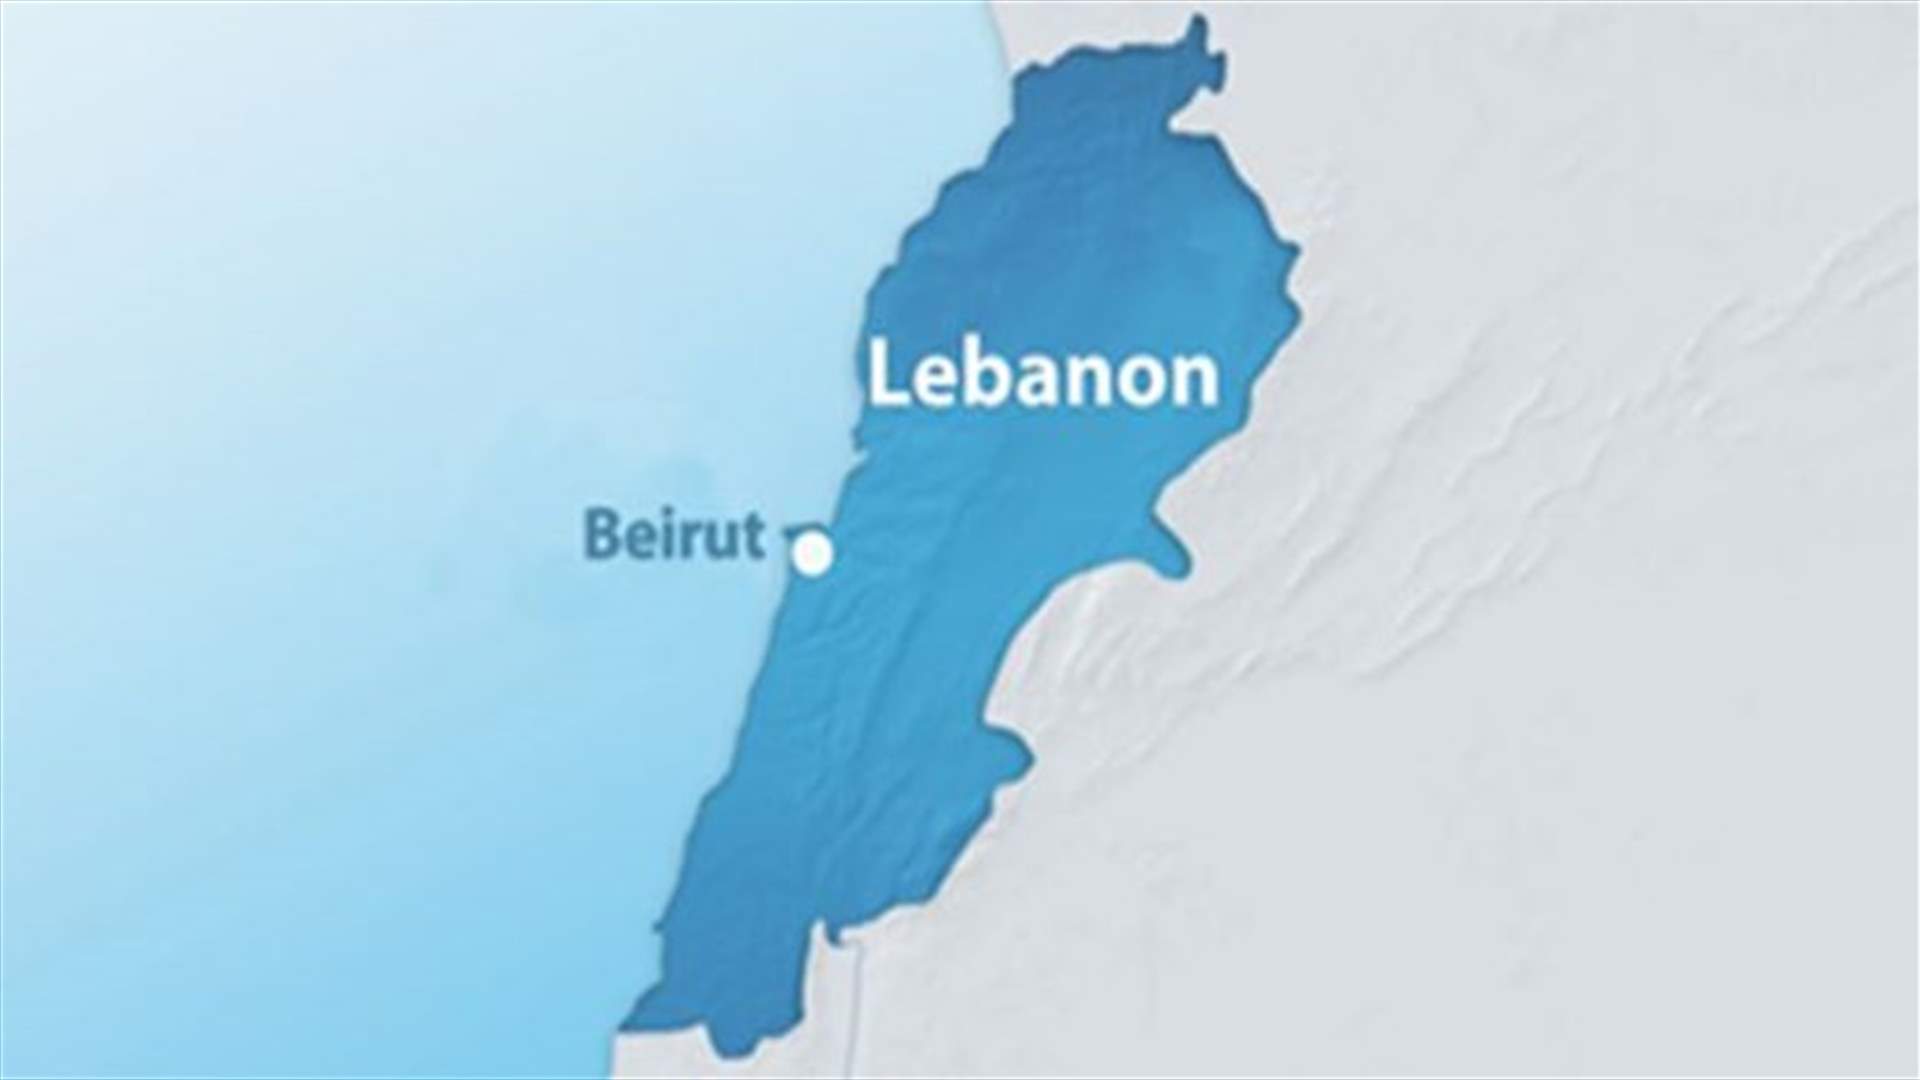 Czech nationals, abducted in Lebanon months ago, released